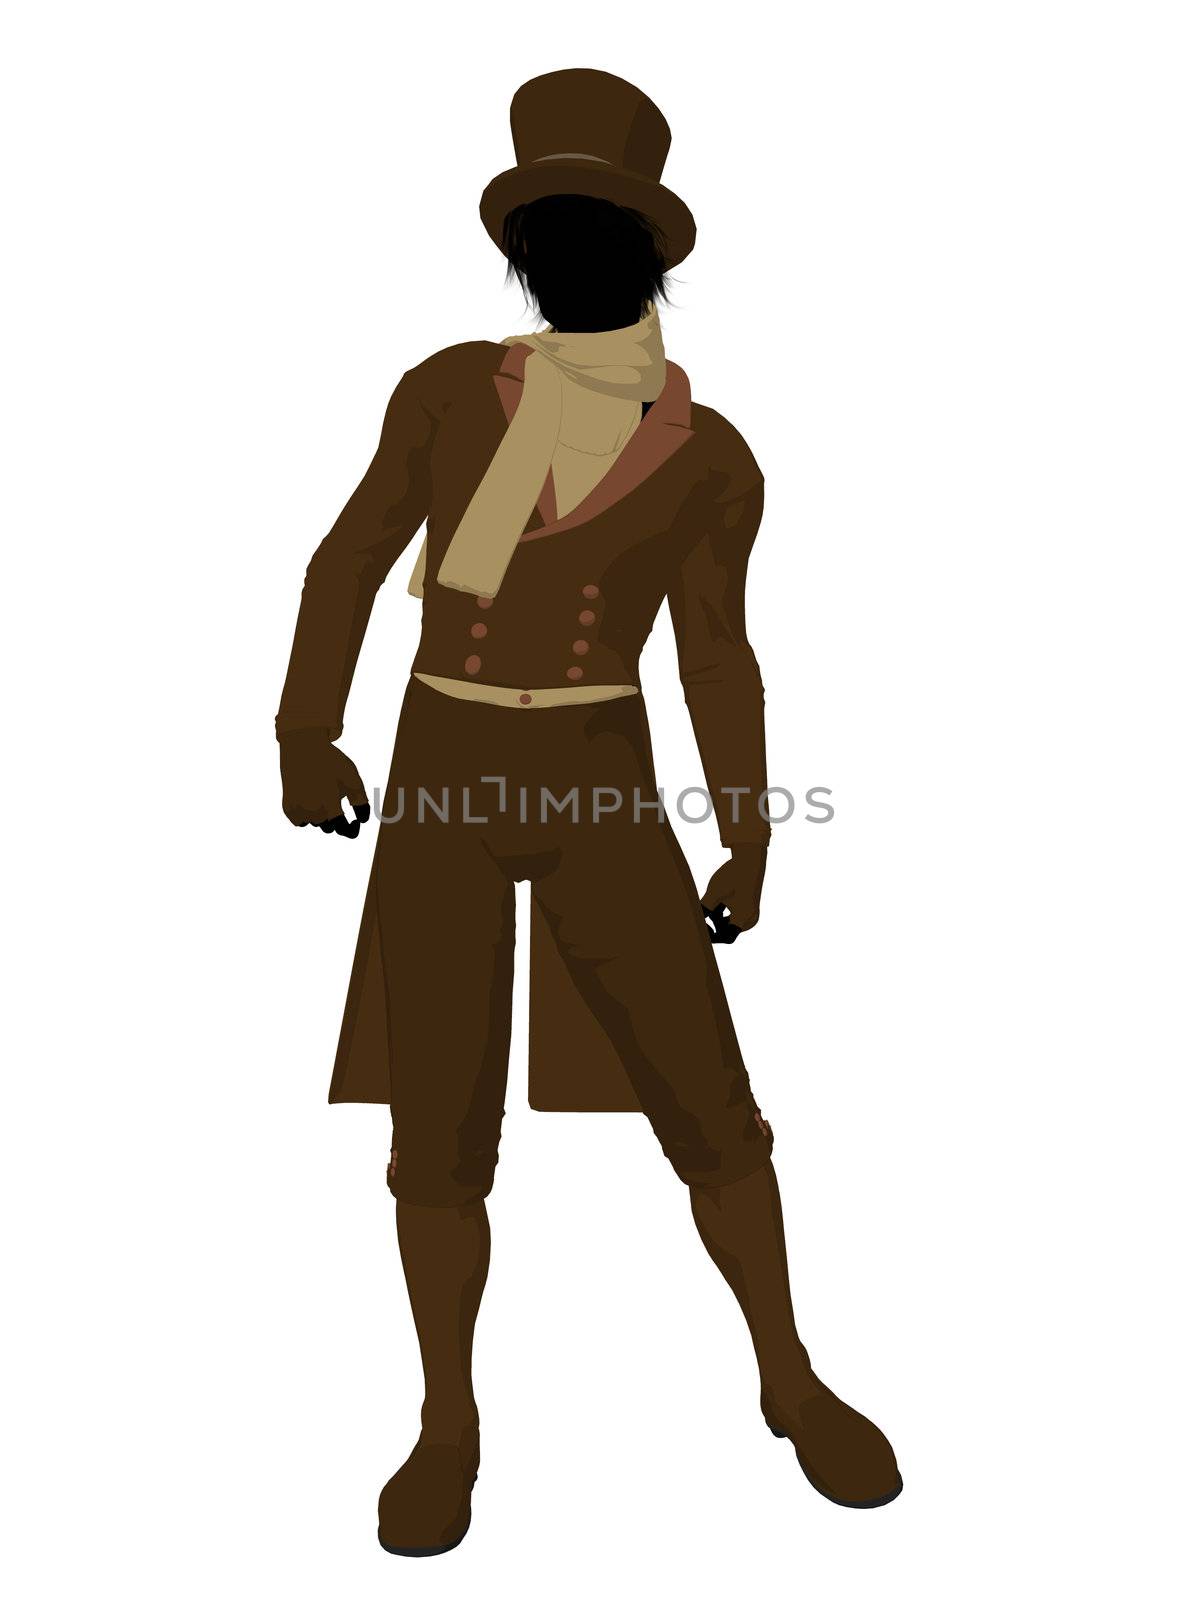 Victorian man art illustration silhouette on a white background